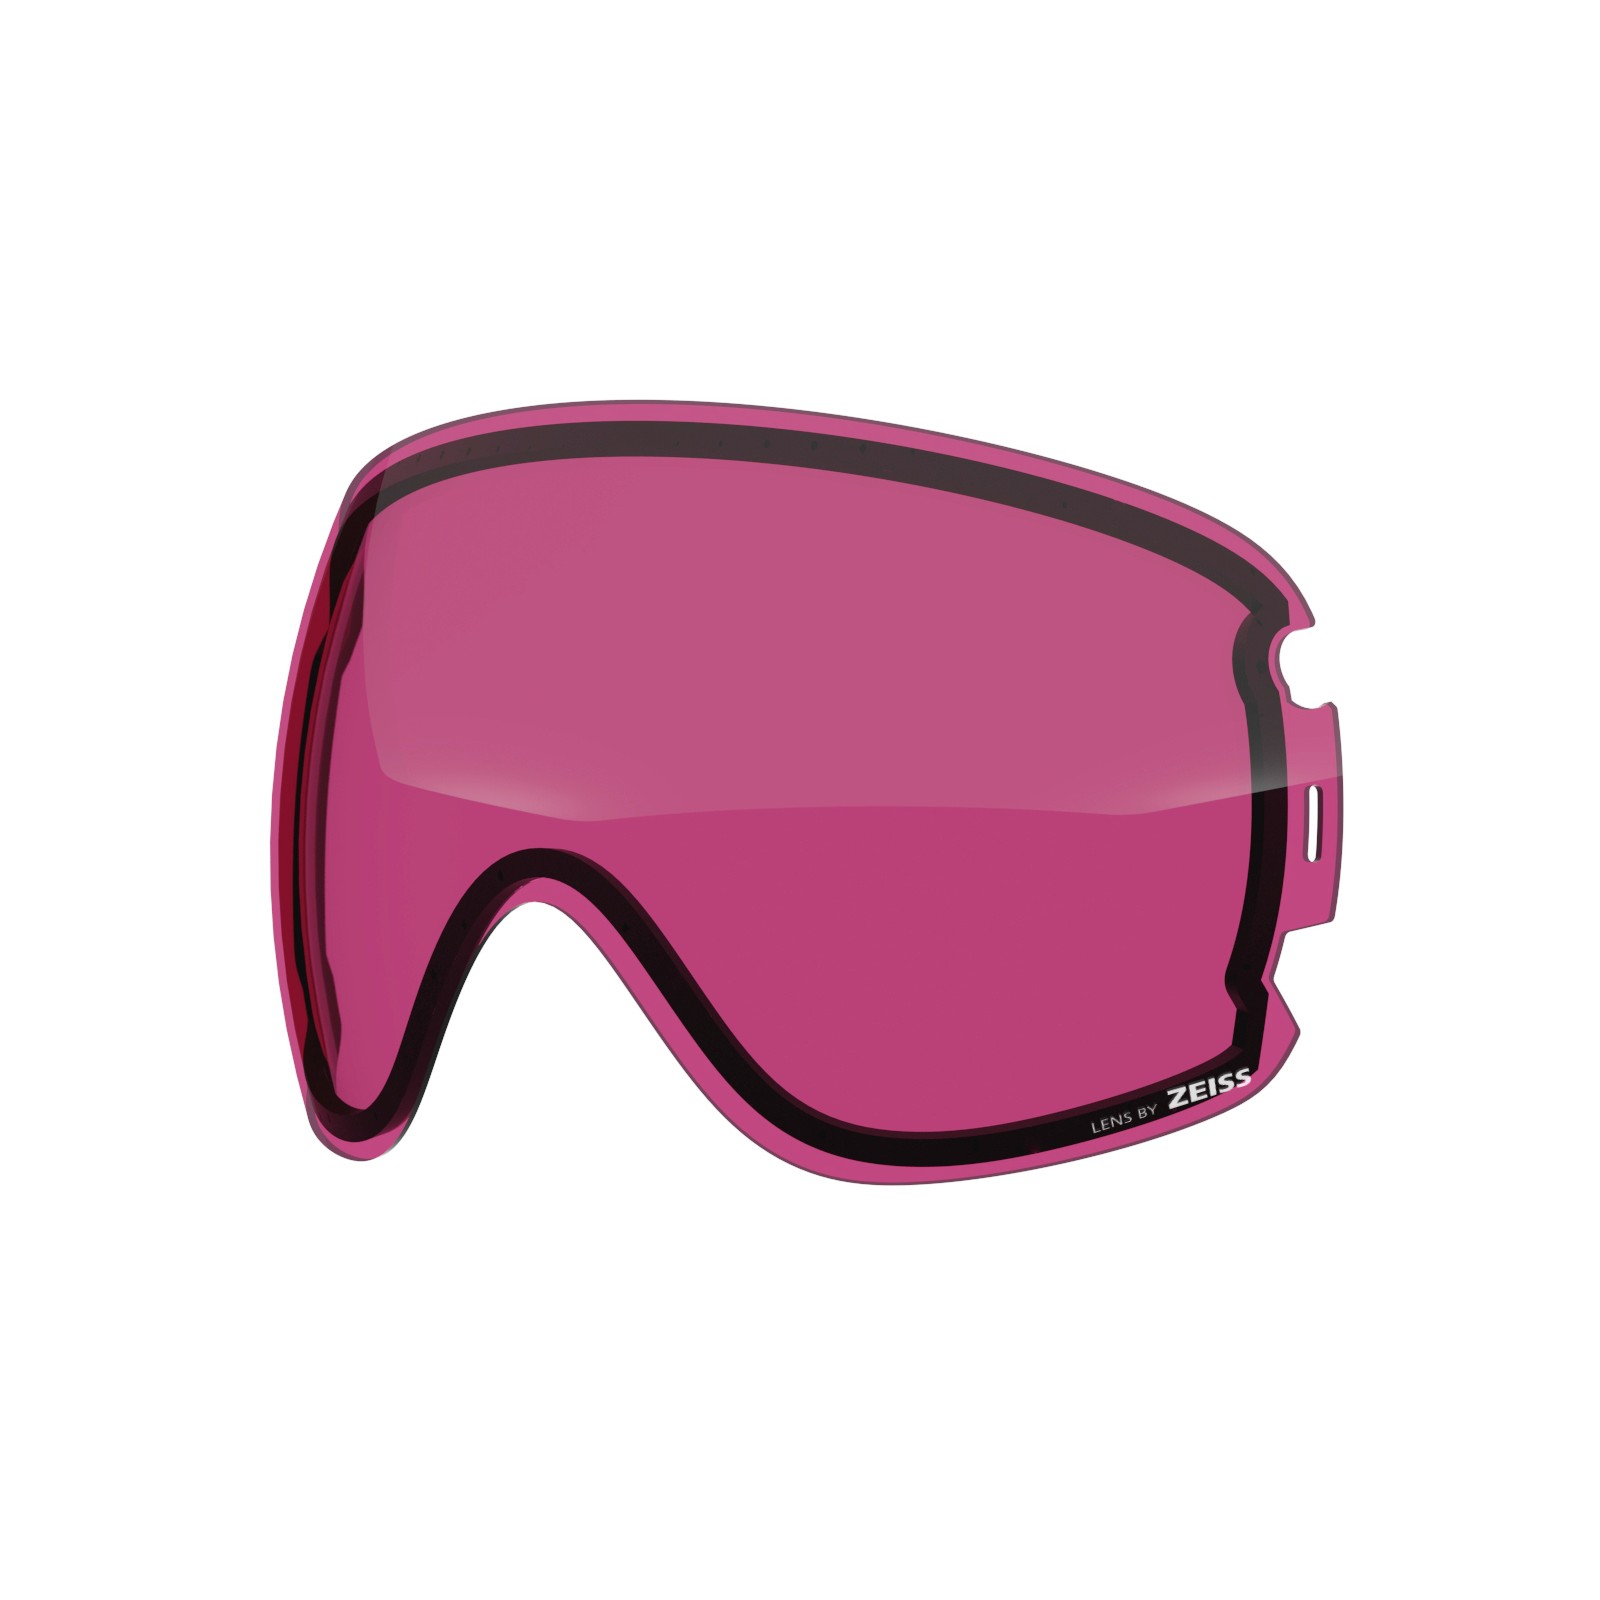 Storm lens for Open XL goggle